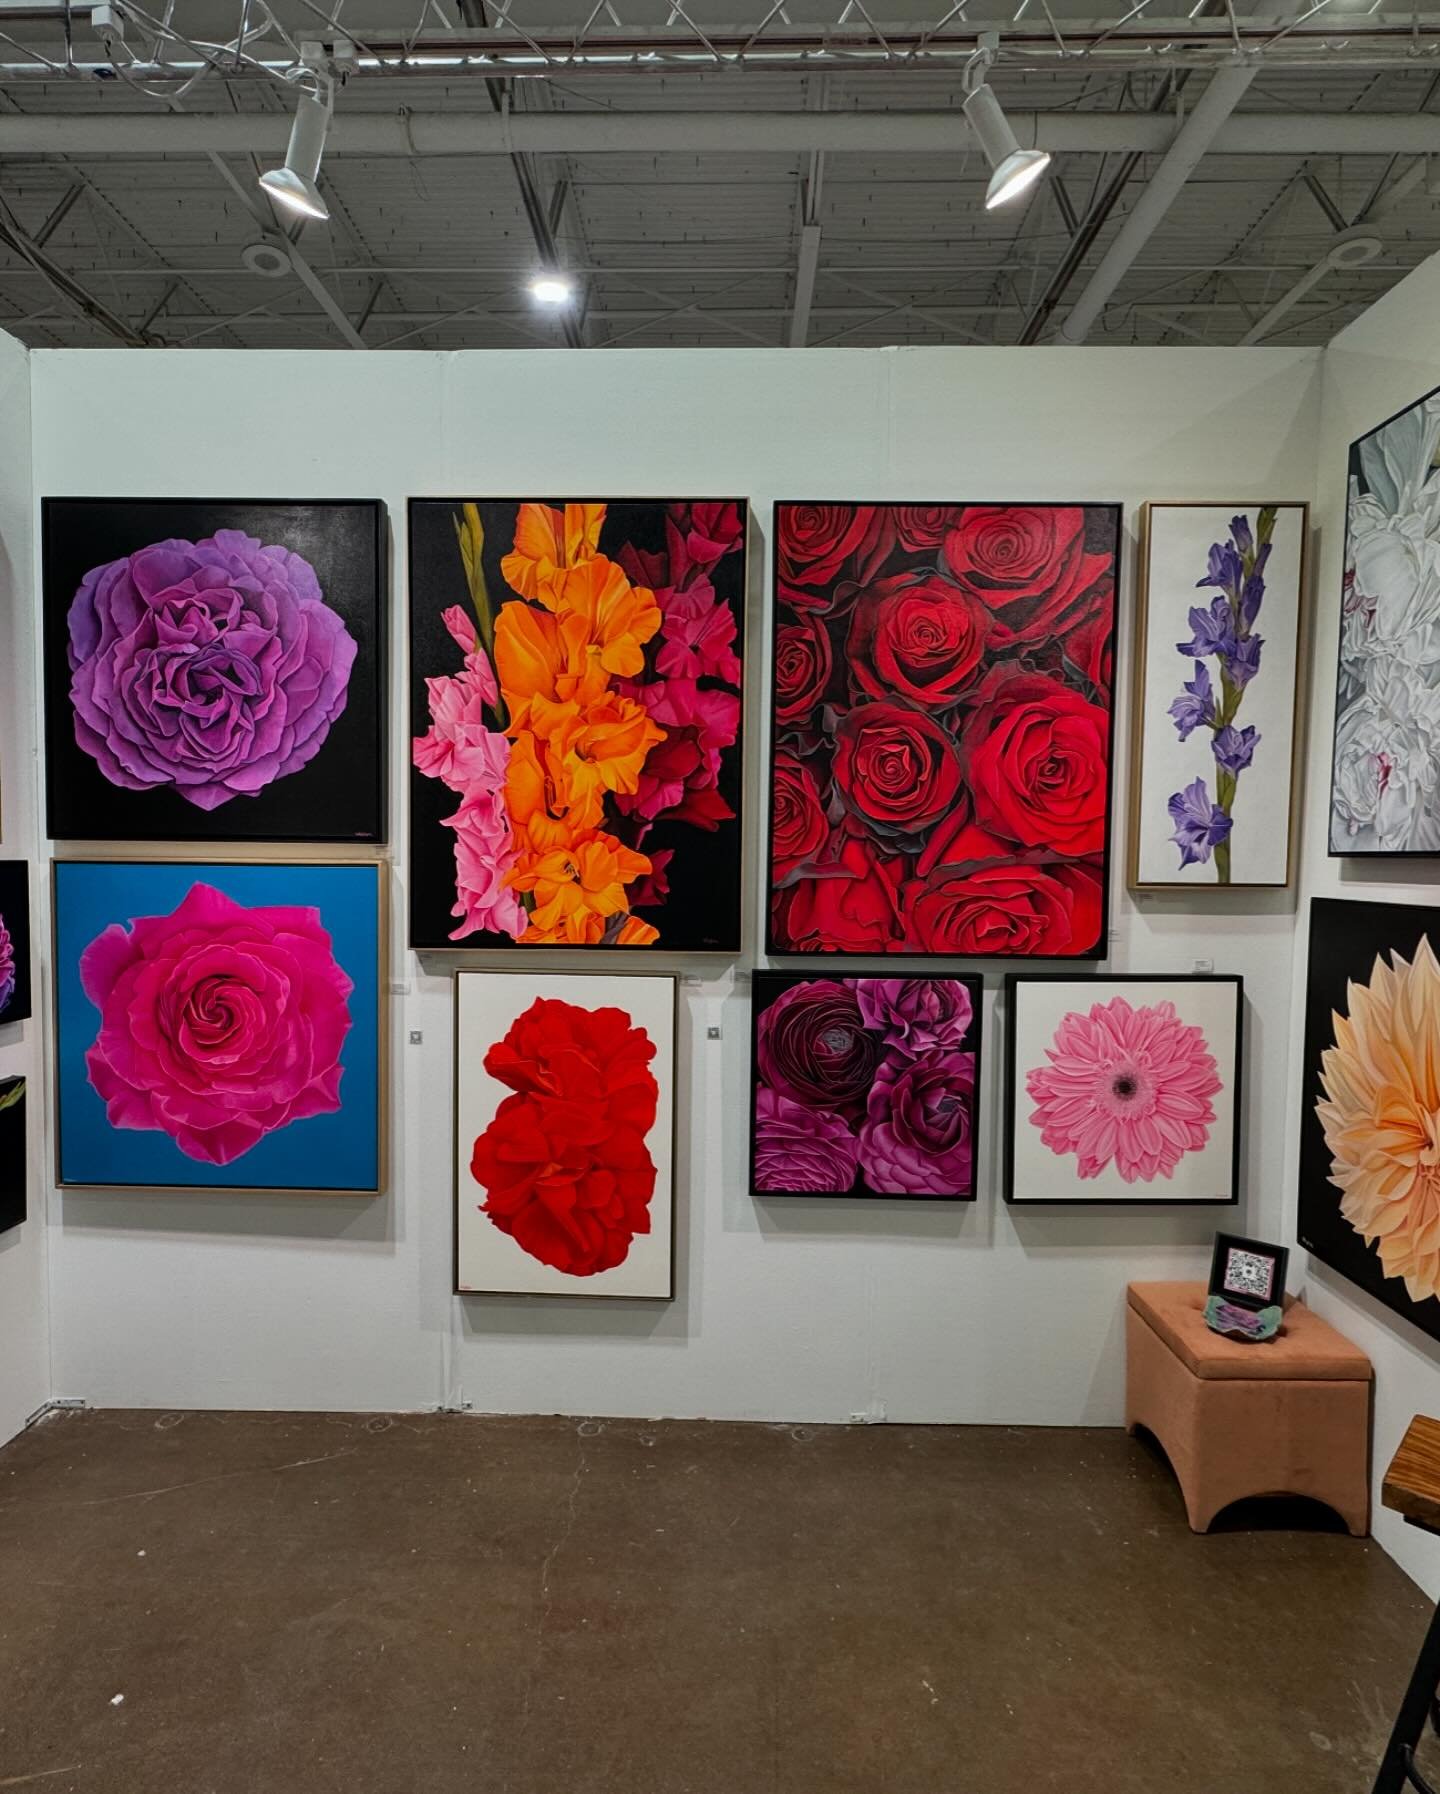 All in and ready to go. Come on out to The Other Art Fair! I&rsquo;m in Booth 34. I may still have a couple of free tickets, try promo code SUSANWINVITE. See y&rsquo;all at 6, Dallas Market Hall. 

@theotherartfair #dallasart #dfwart